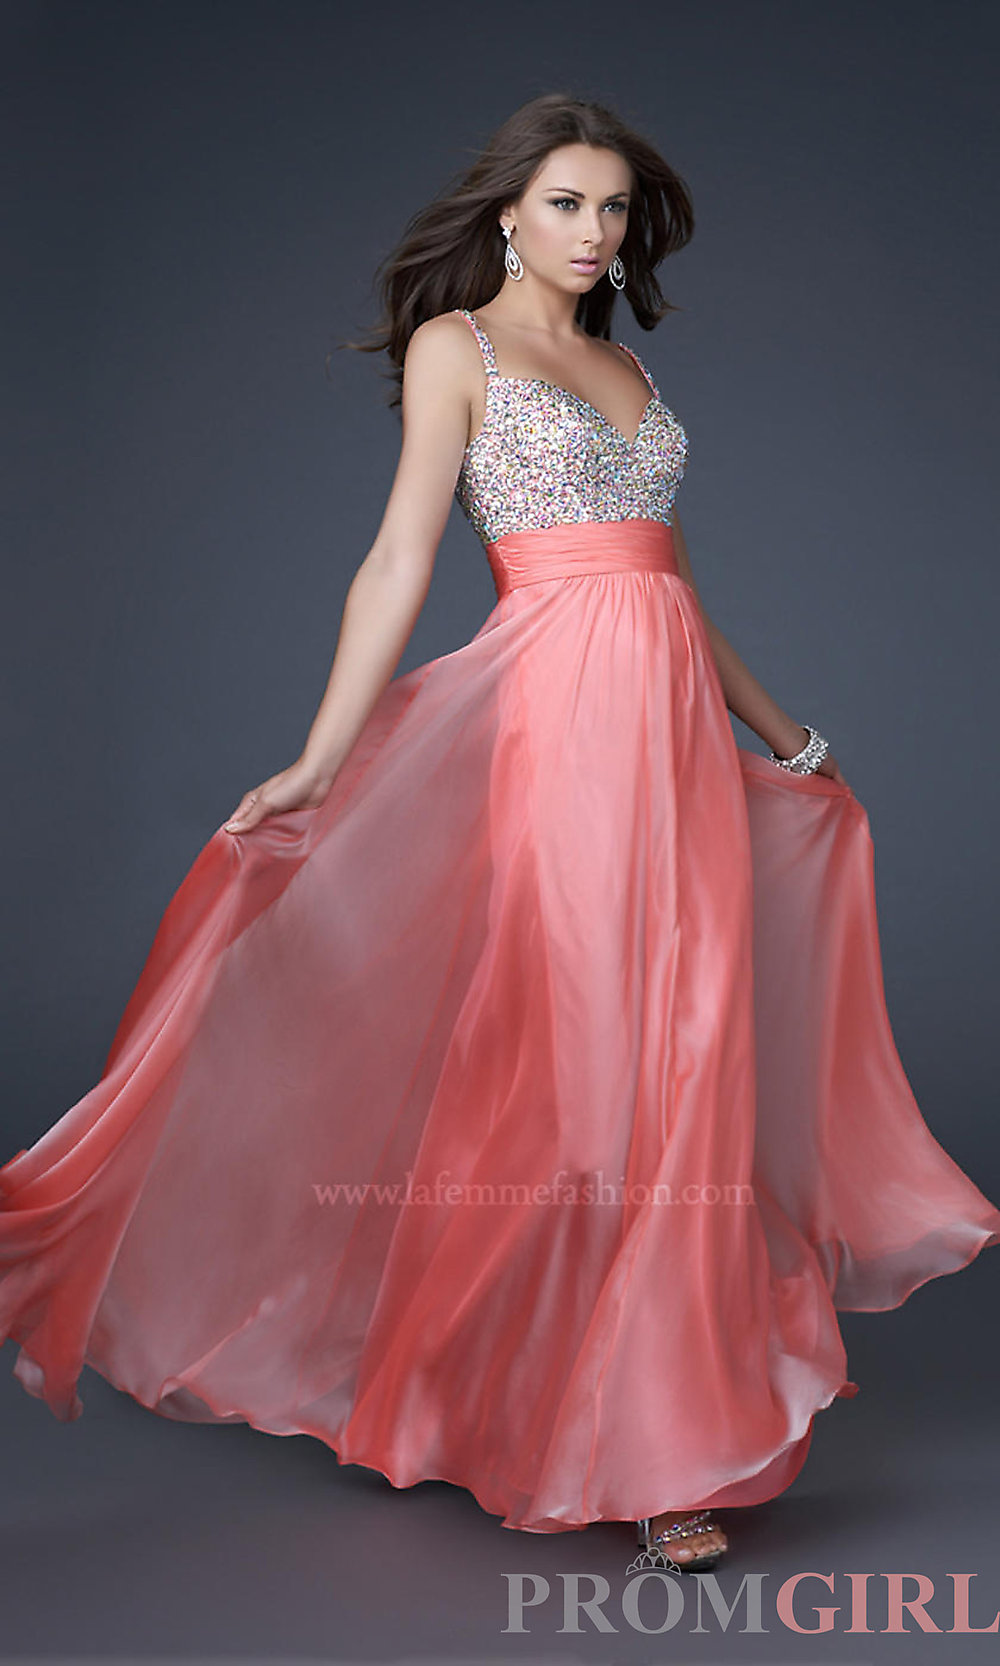 Latest Fancy Gowns, Prom and Cocktail dresses for Weddings and Parties 2014-2015 (8)